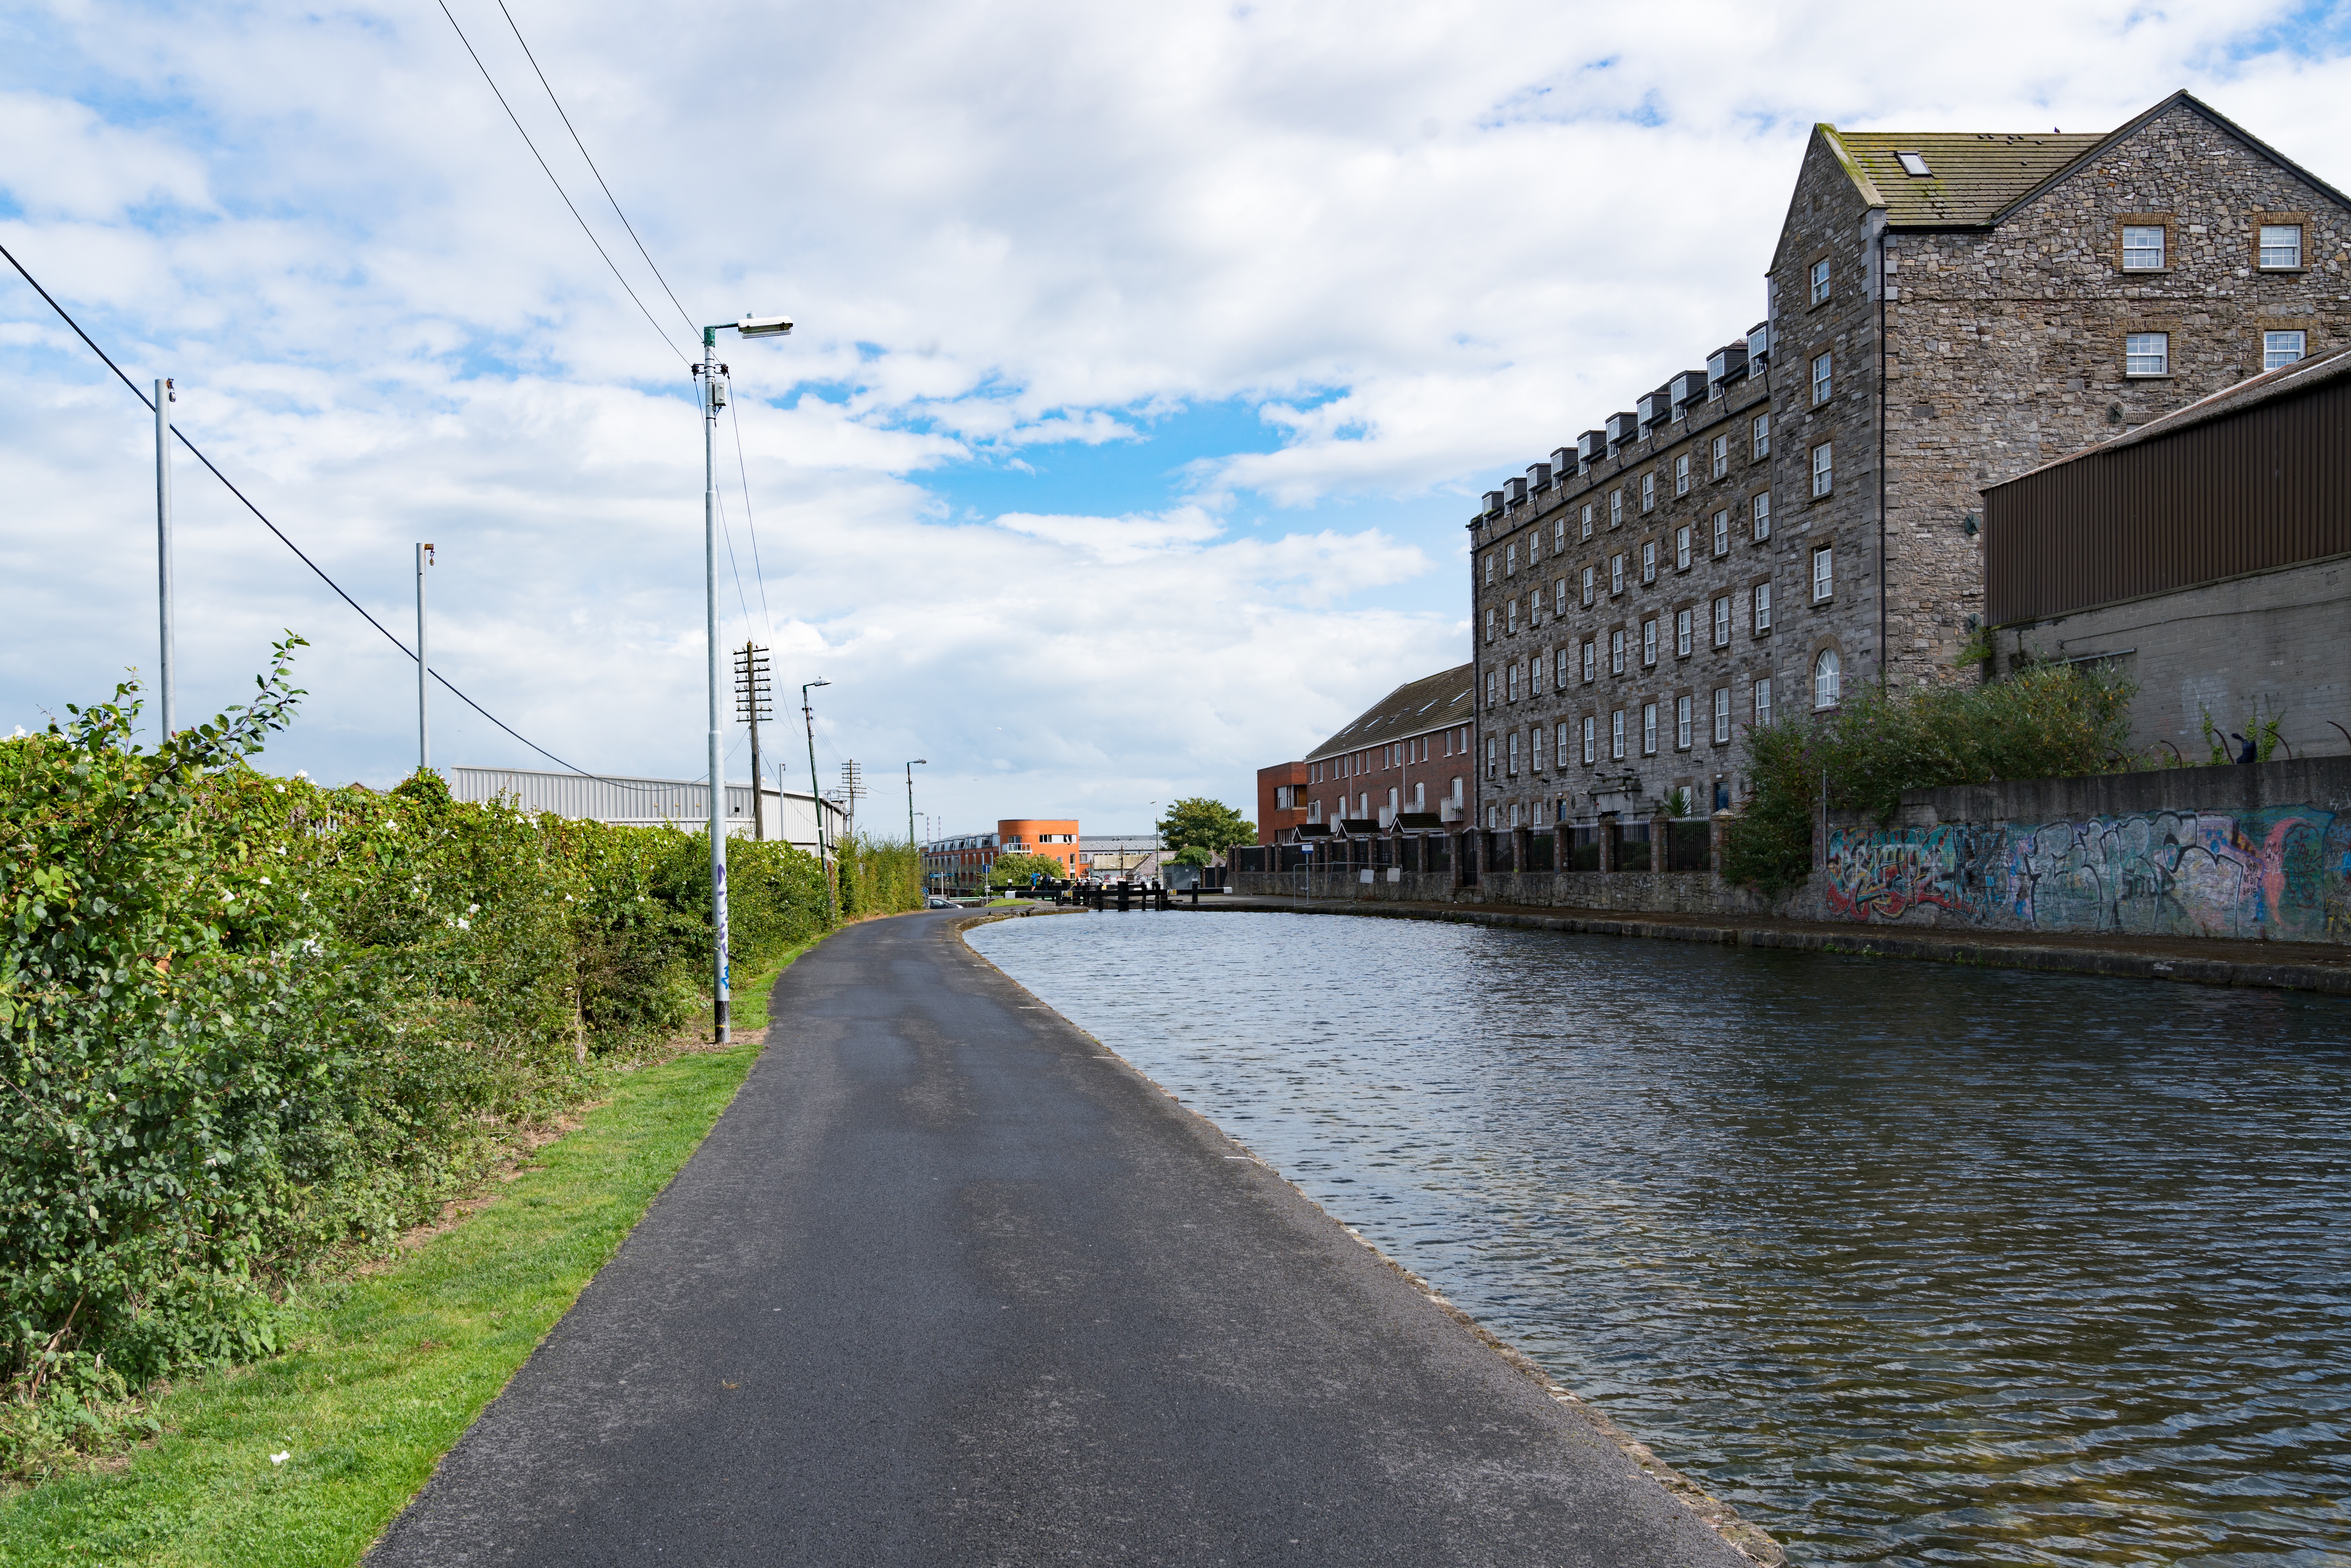  ROYAL CANAL - CABRA AREA 025 